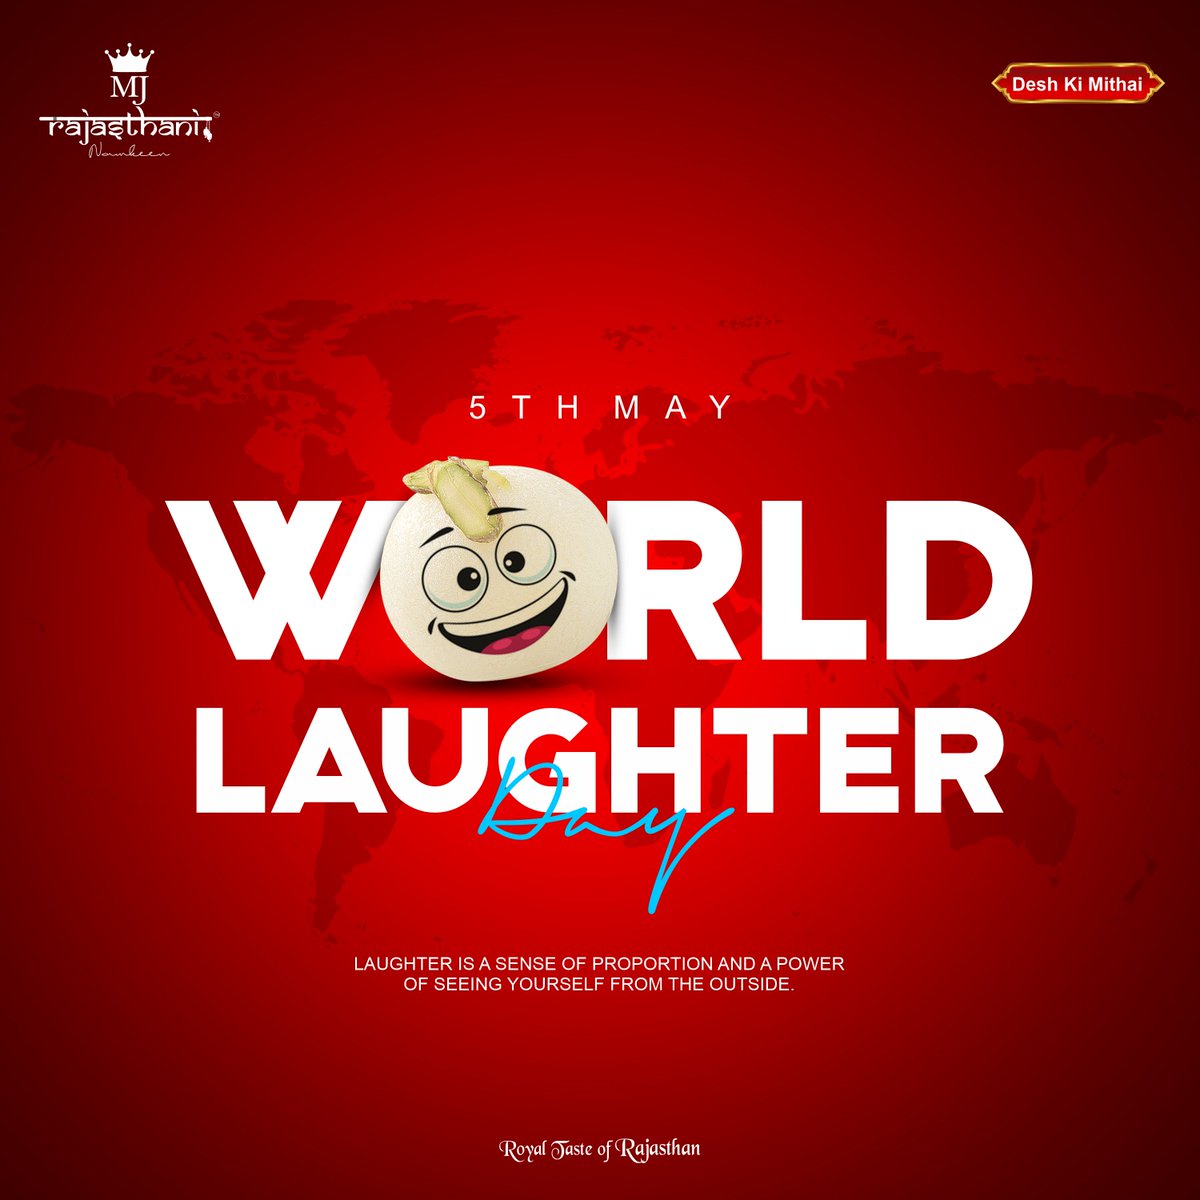 Let's celebrate the power of laughter today and every day. Sending you lots of laughter and happiness on World Laughter Day!😄

#MJRajasthaniNamkeen #LaughterDay #WorldLaughterDay #LaughterDay2024 #SpreadLaugh #SpreadHappiness